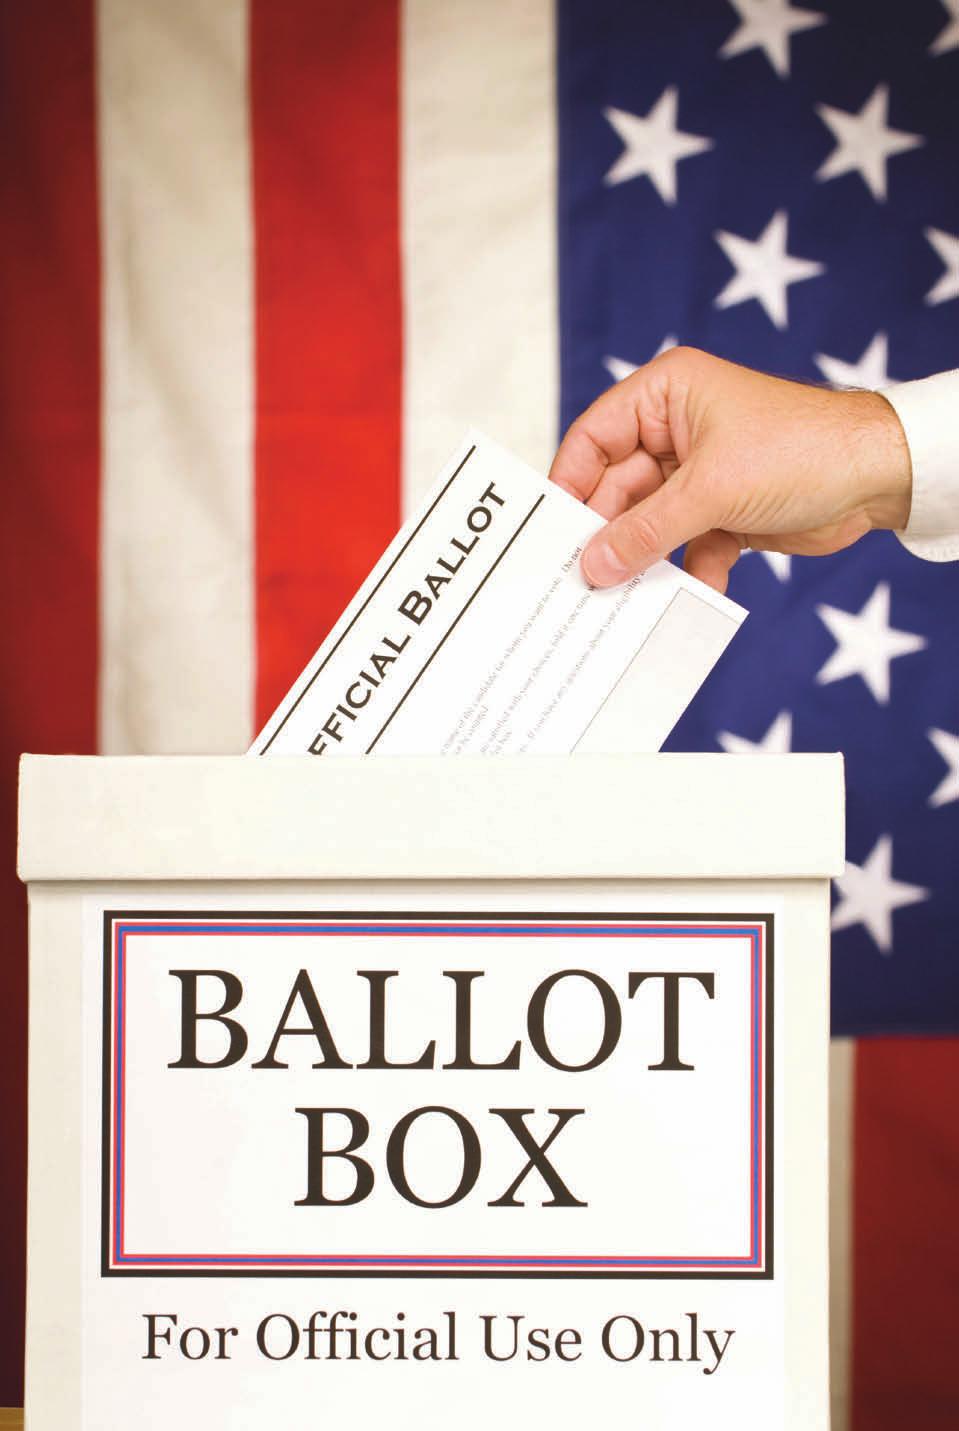 Where do I go to vote? You will need to go to the polling place that you are assigned to by the County Election Clerk after you registered to vote.